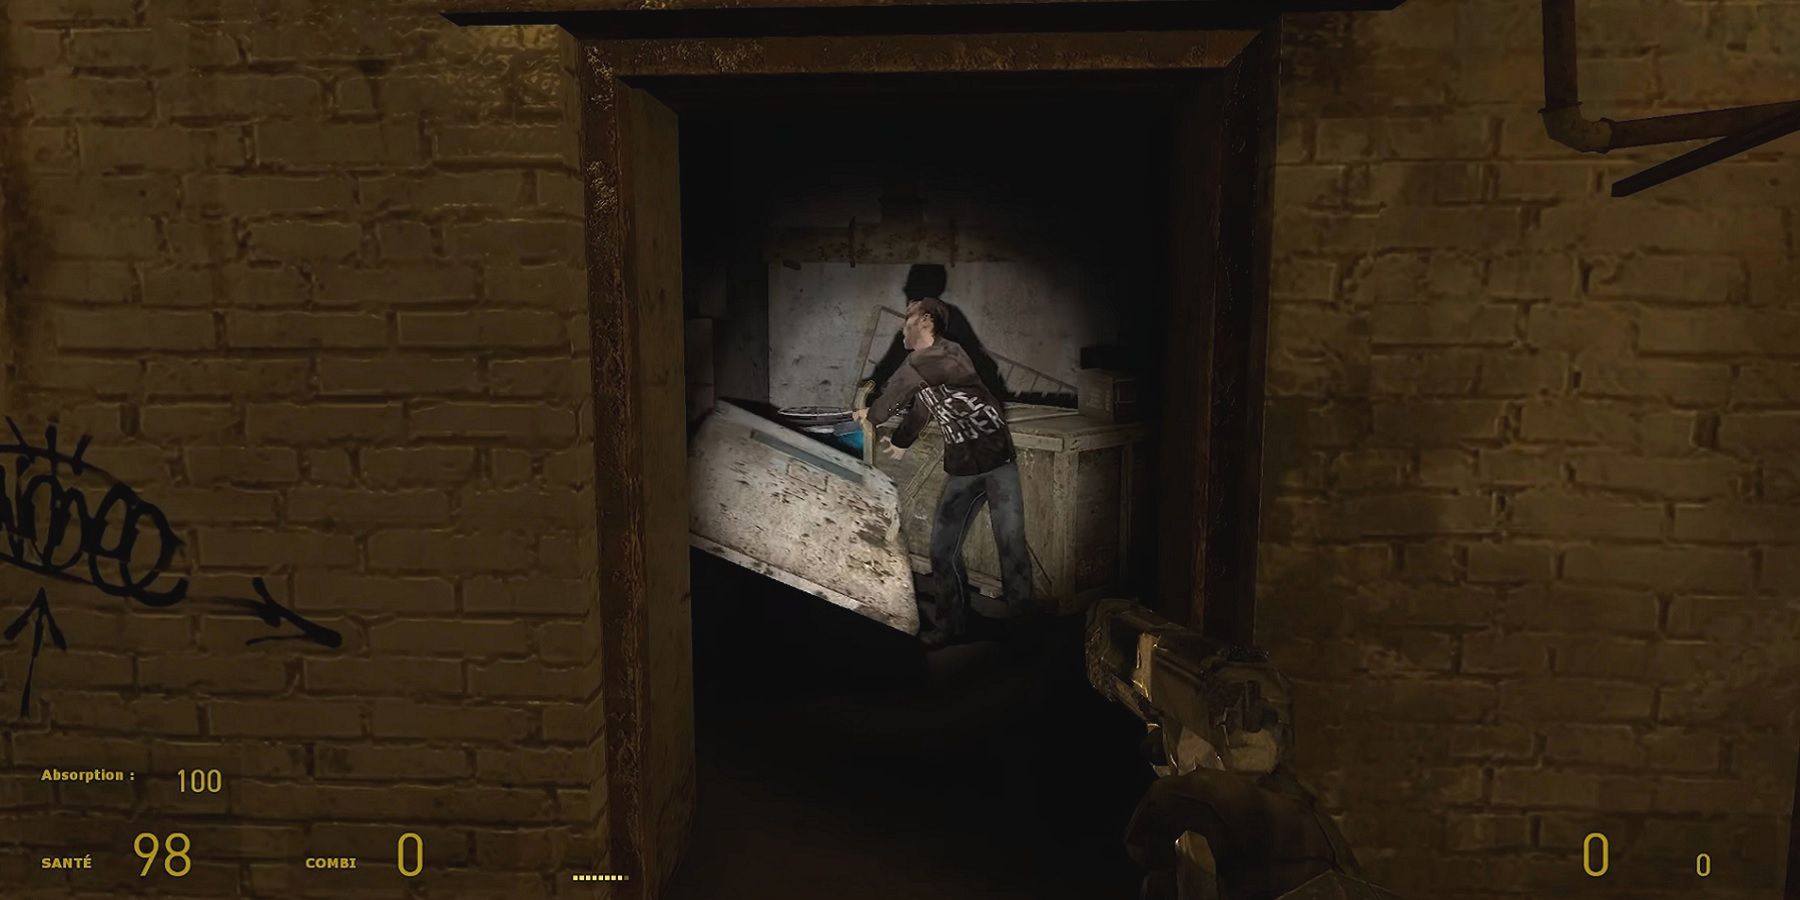 Image from canceled Half-Life game Ravenholm showing the player about to shoot a zombie.